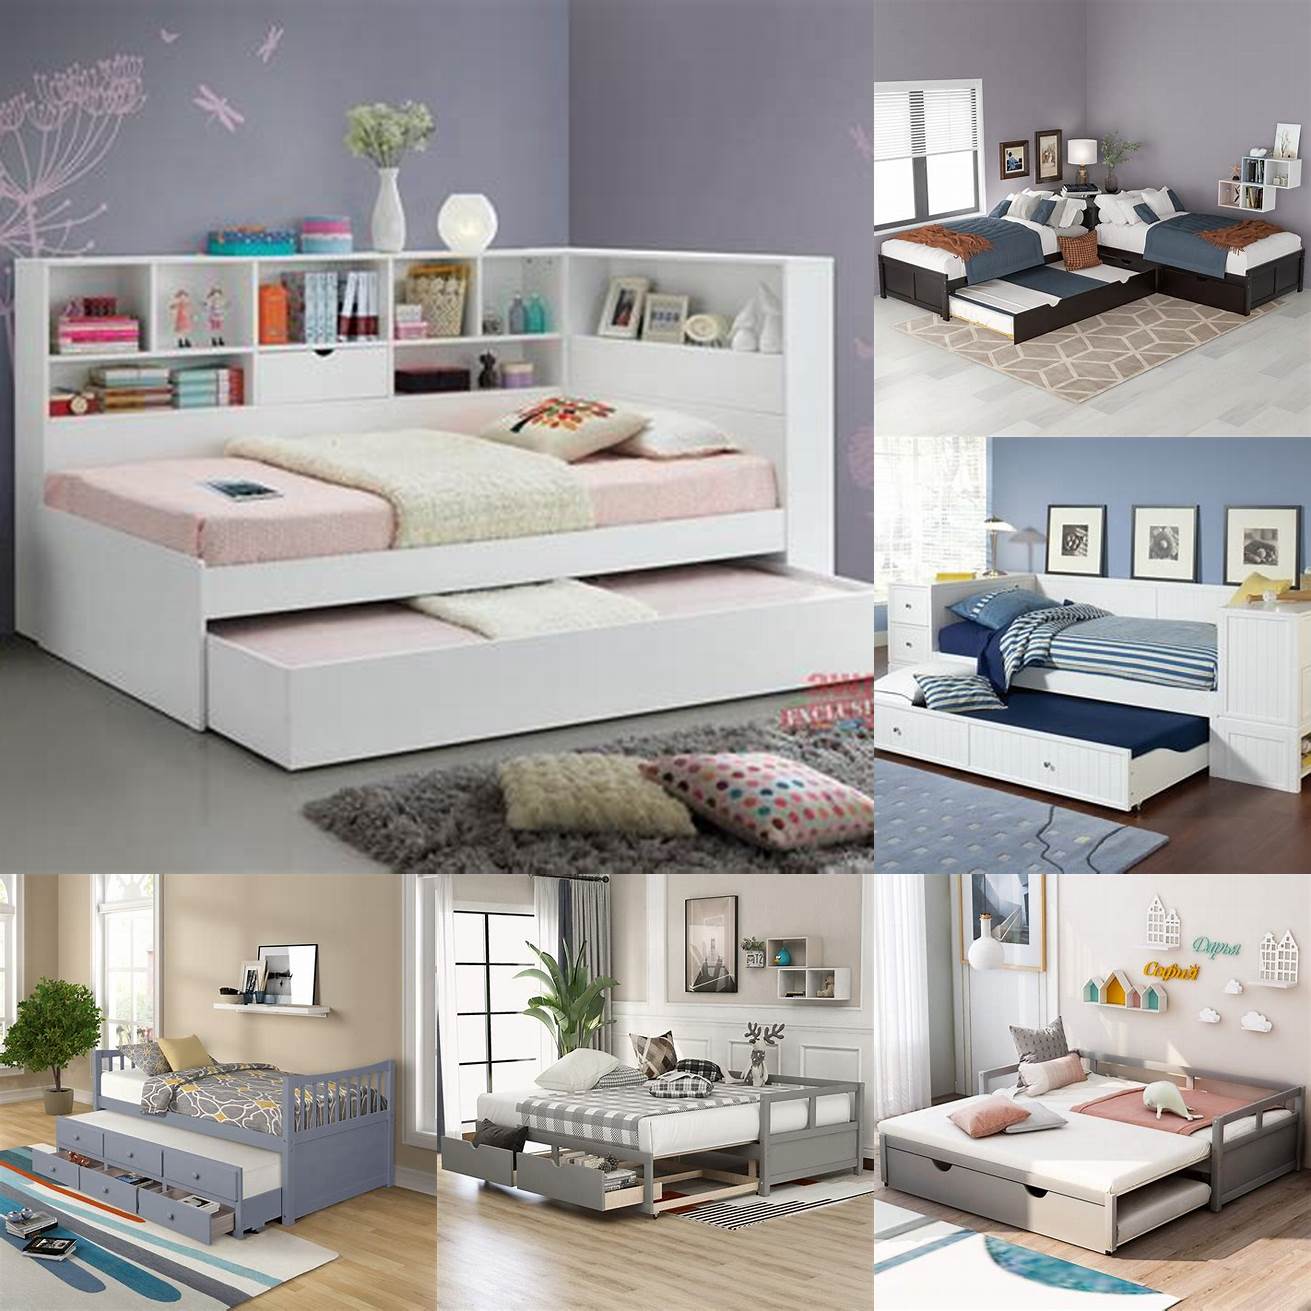 A trundle bed with built-in storage is perfect for a childs room with limited space